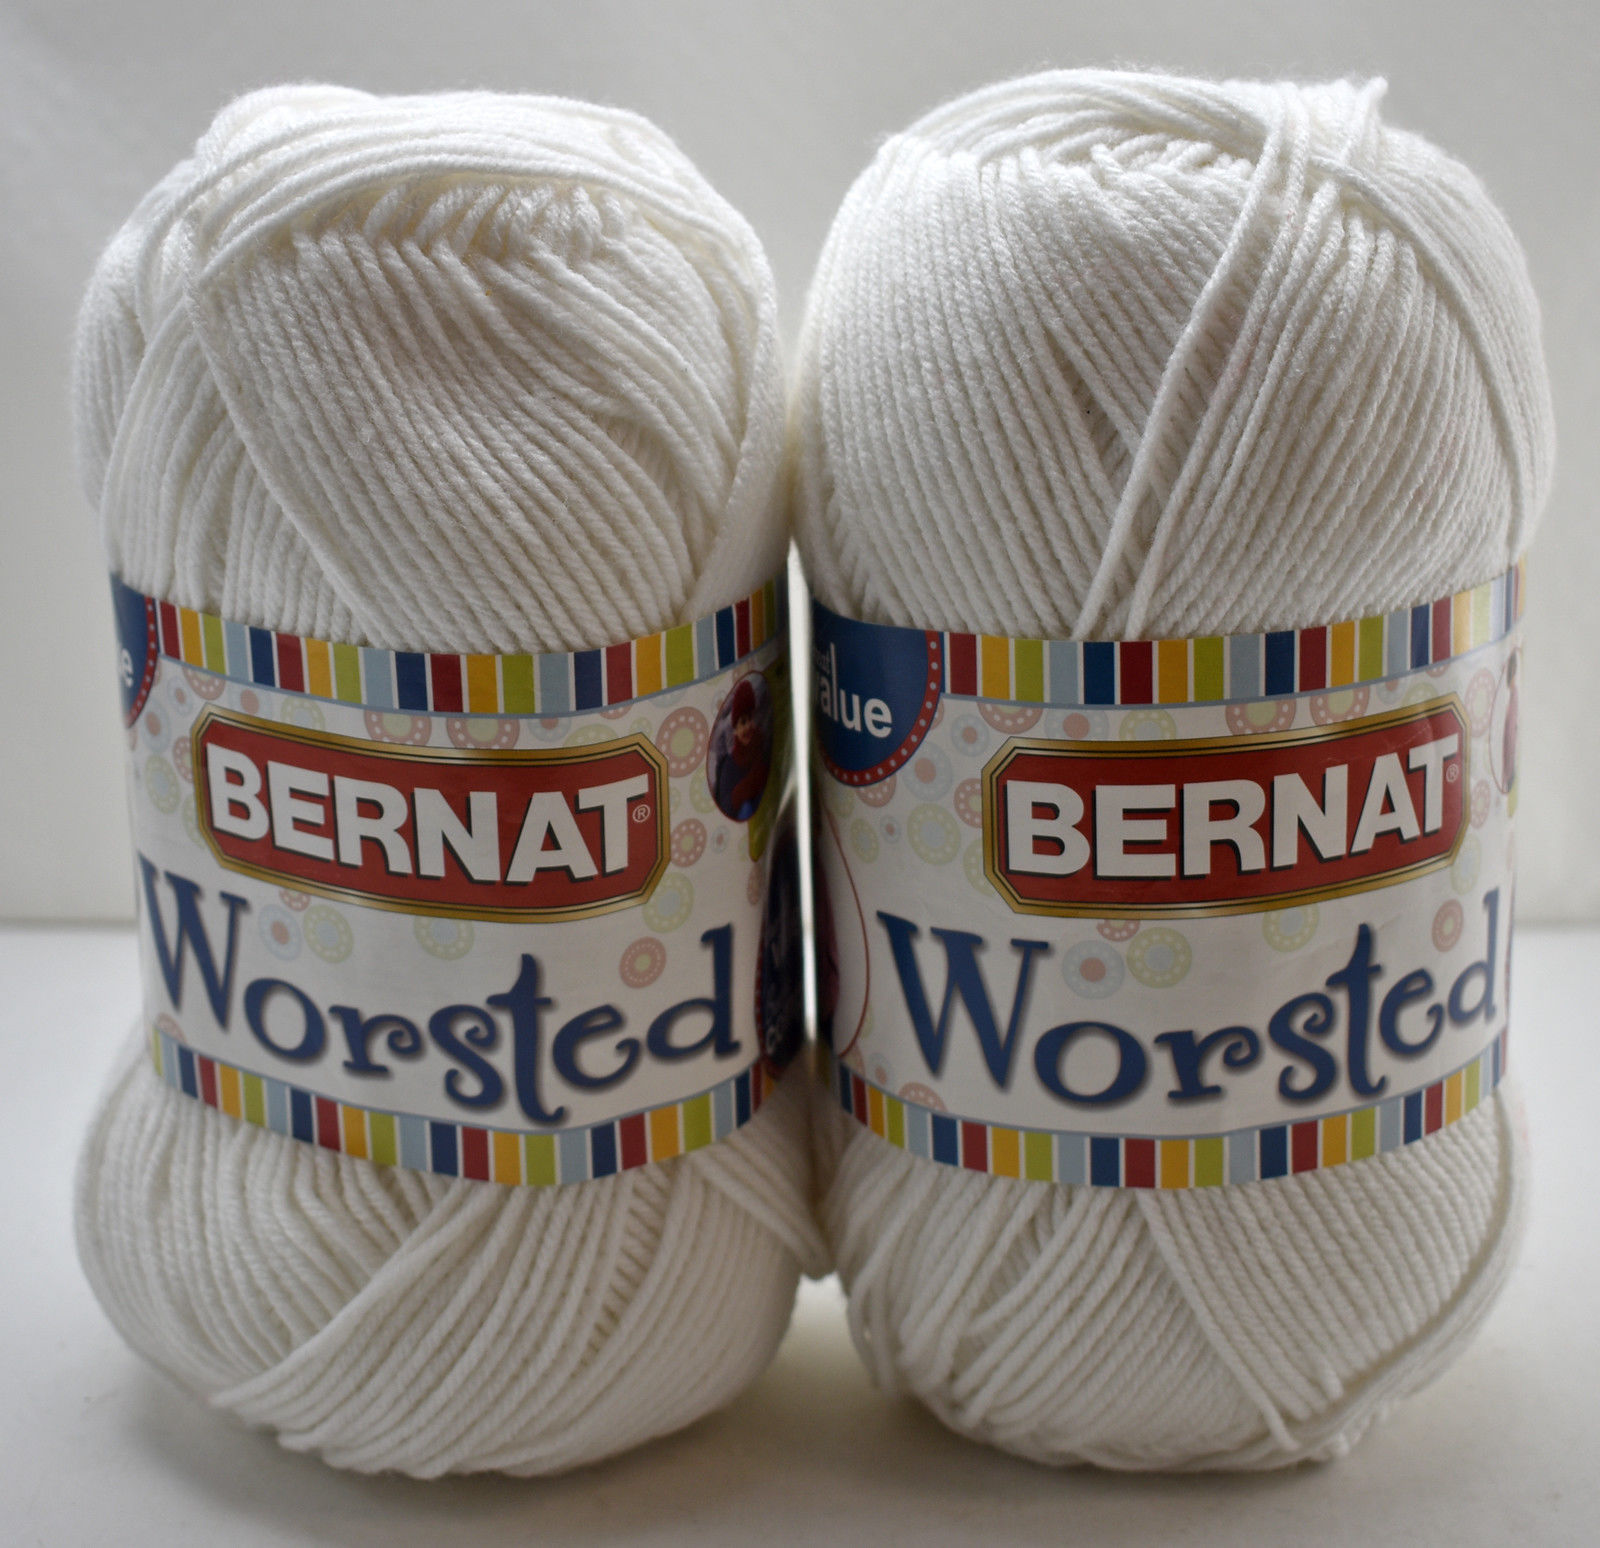 Primary image for Bernat Worsted Solid Medium Weight Acrylic Yarn - 2 Skeins 402 yds - Color White